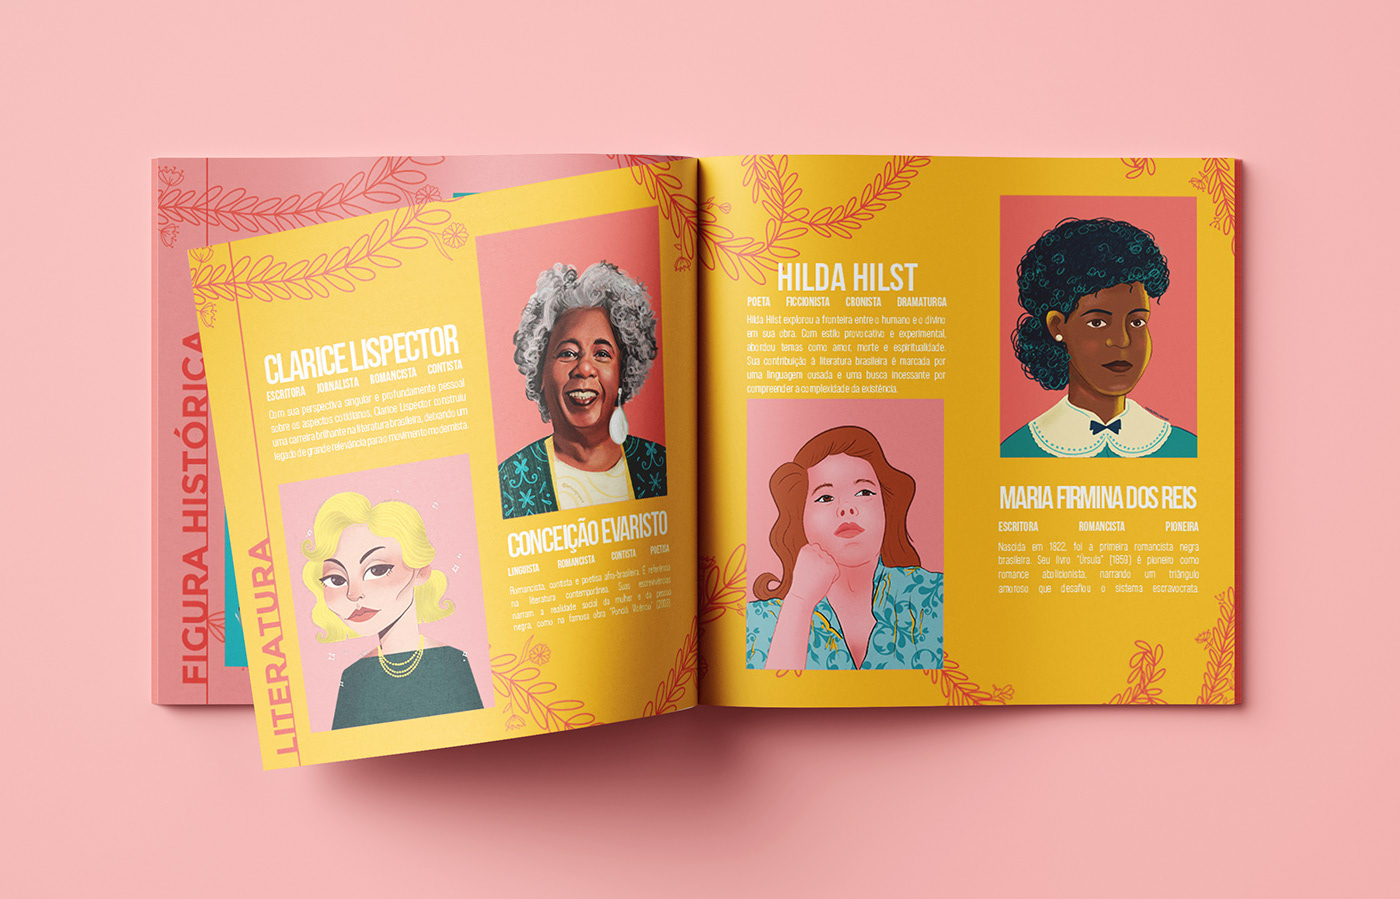 Mockup of a sticker album with illustrated portraits of empowered brazilian women in literature.